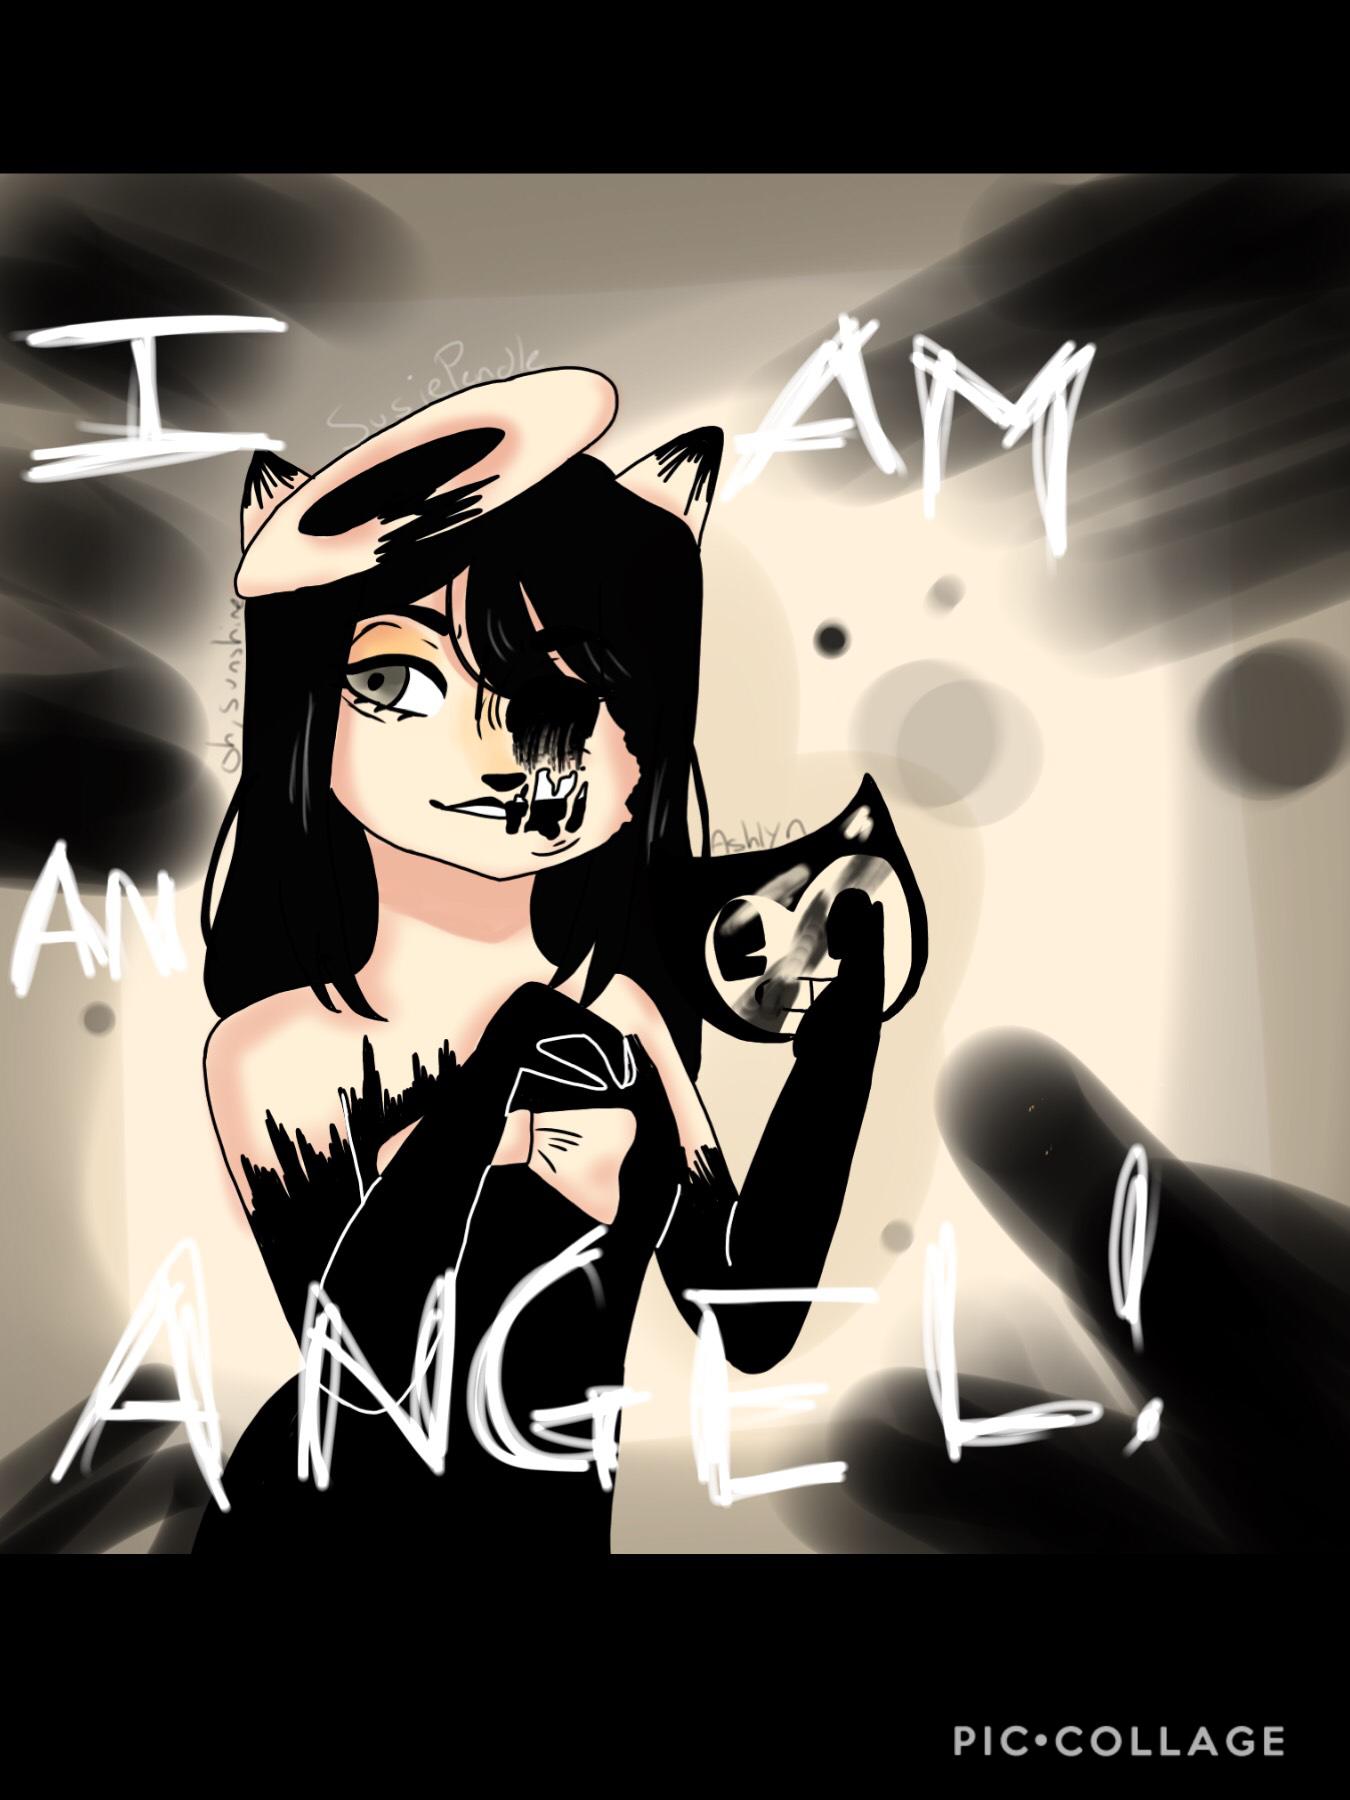 "I AM AN ANGEL" ((Tap))
Here's a drawing of Susie! You'll be seeing her a lot on this account-